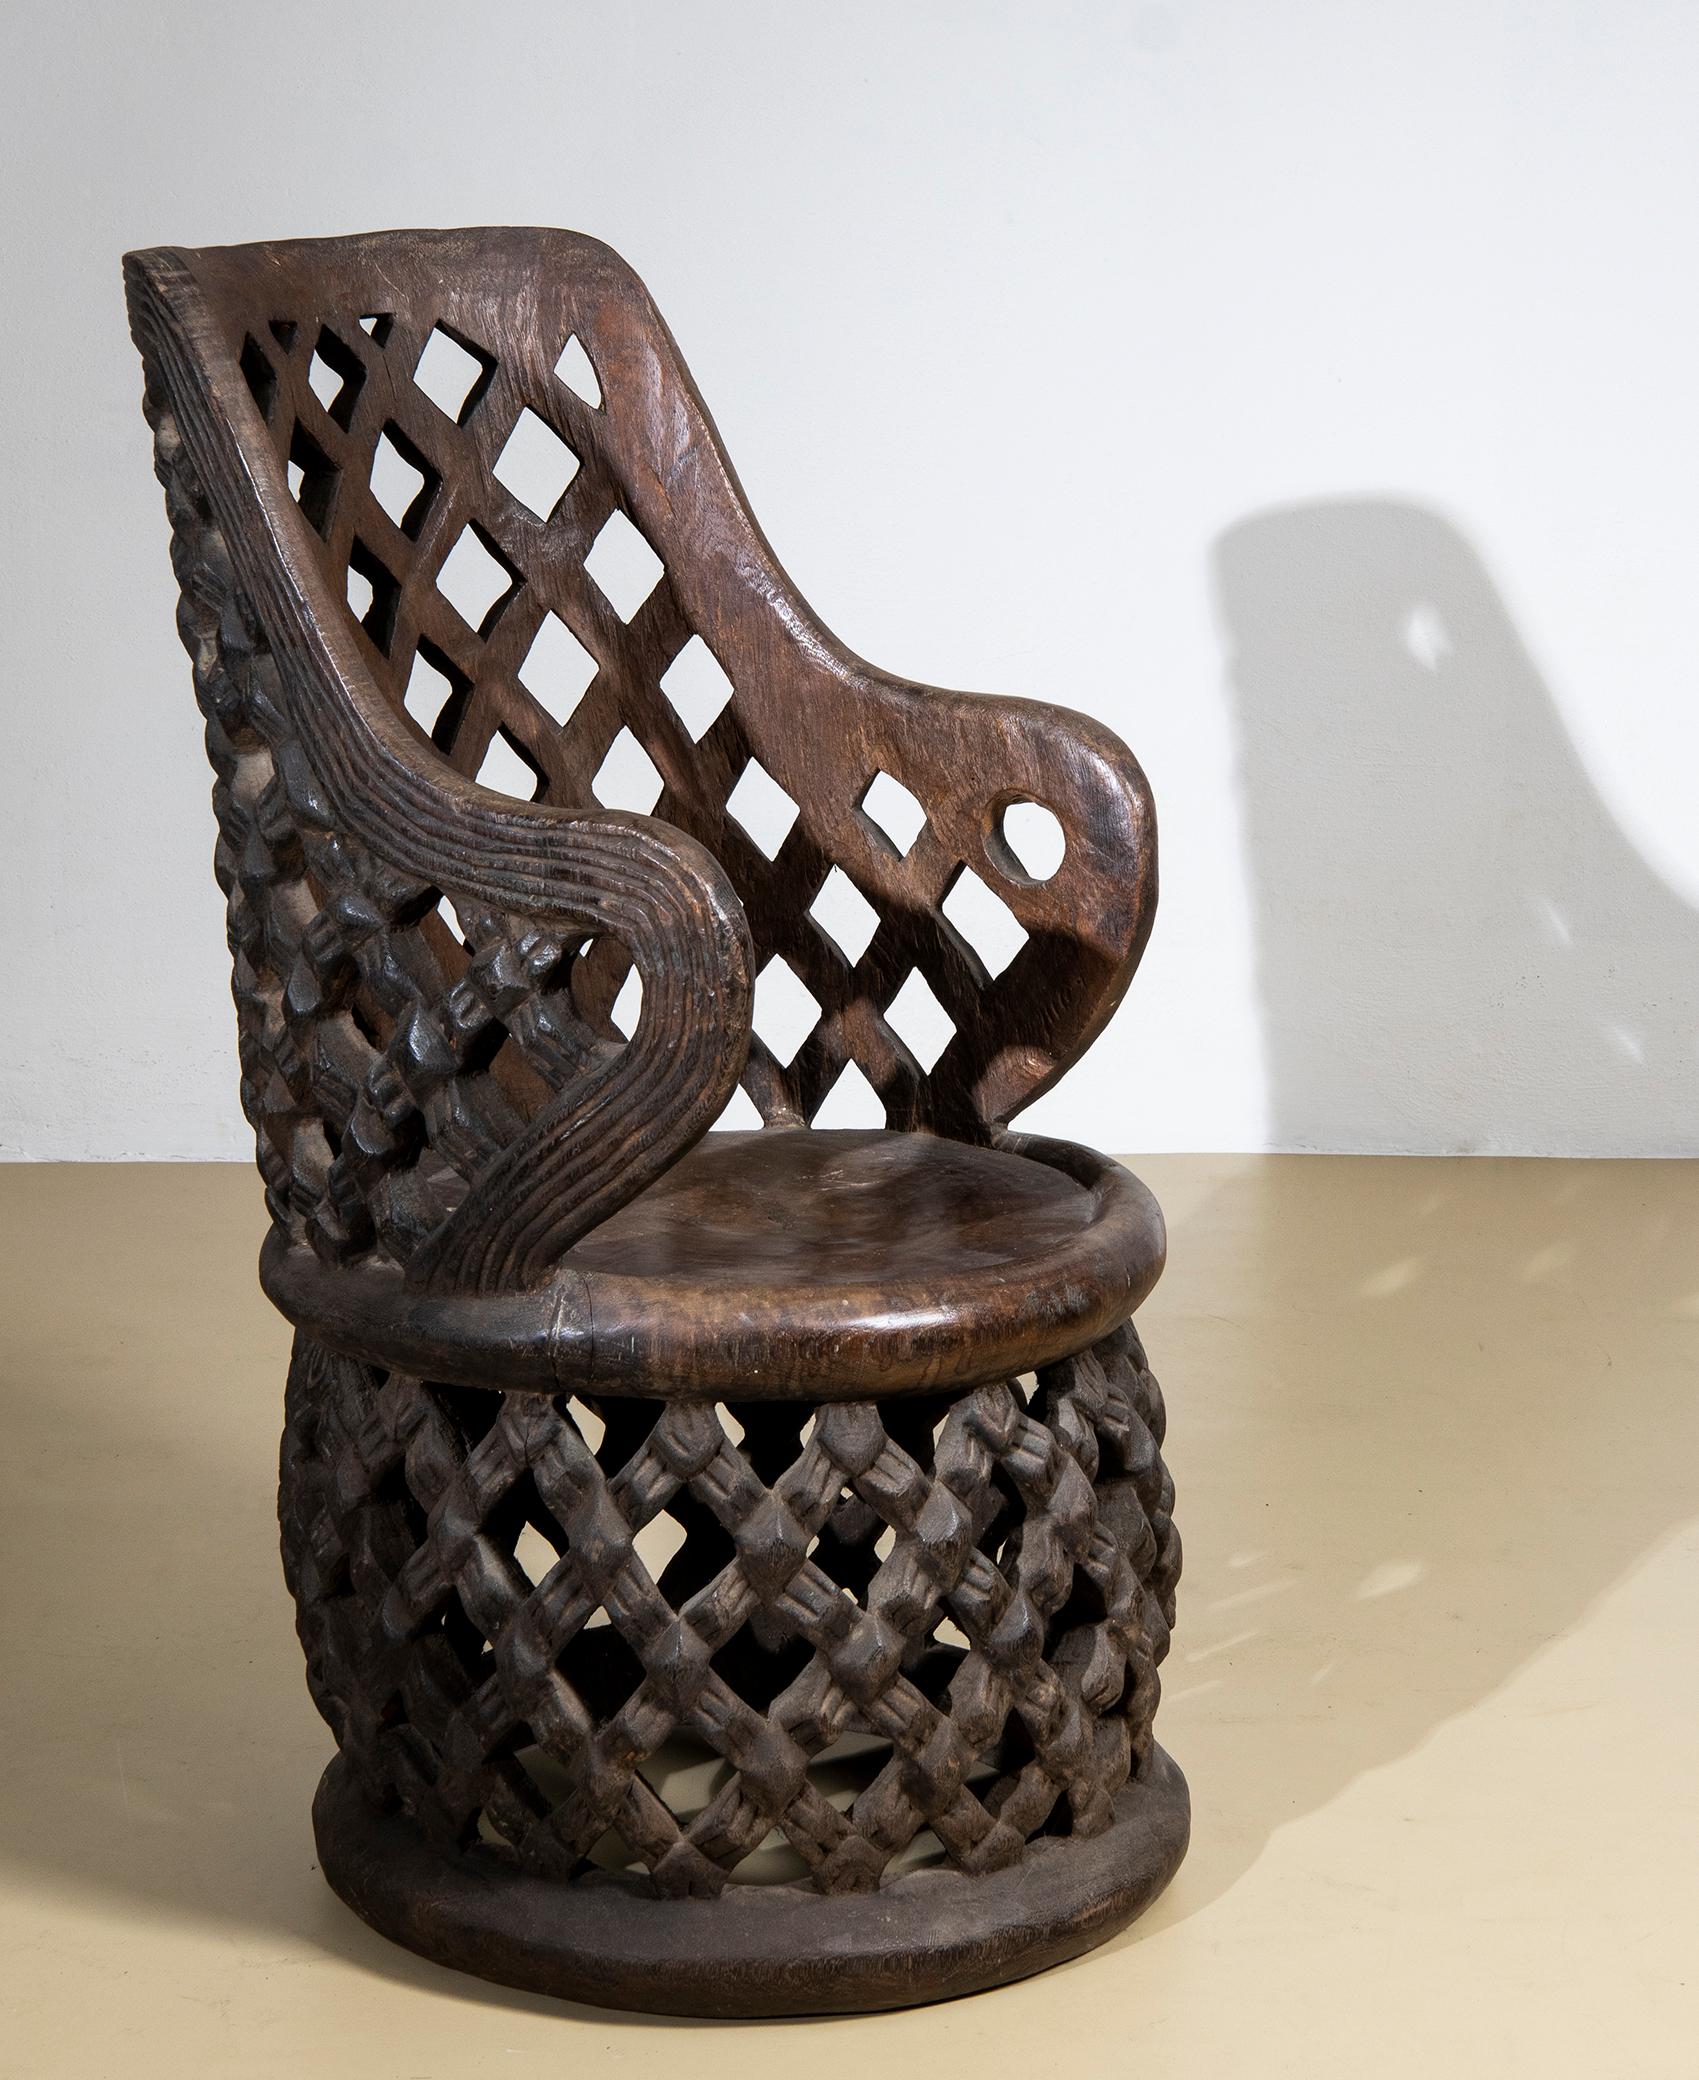 2 beautiful African thrones of the Bamileké people, Cameroon, hand-carved from a single log of Cola hardwood, stained black.
It features the typical Bamilekè perforated 'spider's web' workmanship, symbolizing the bond between the living and the